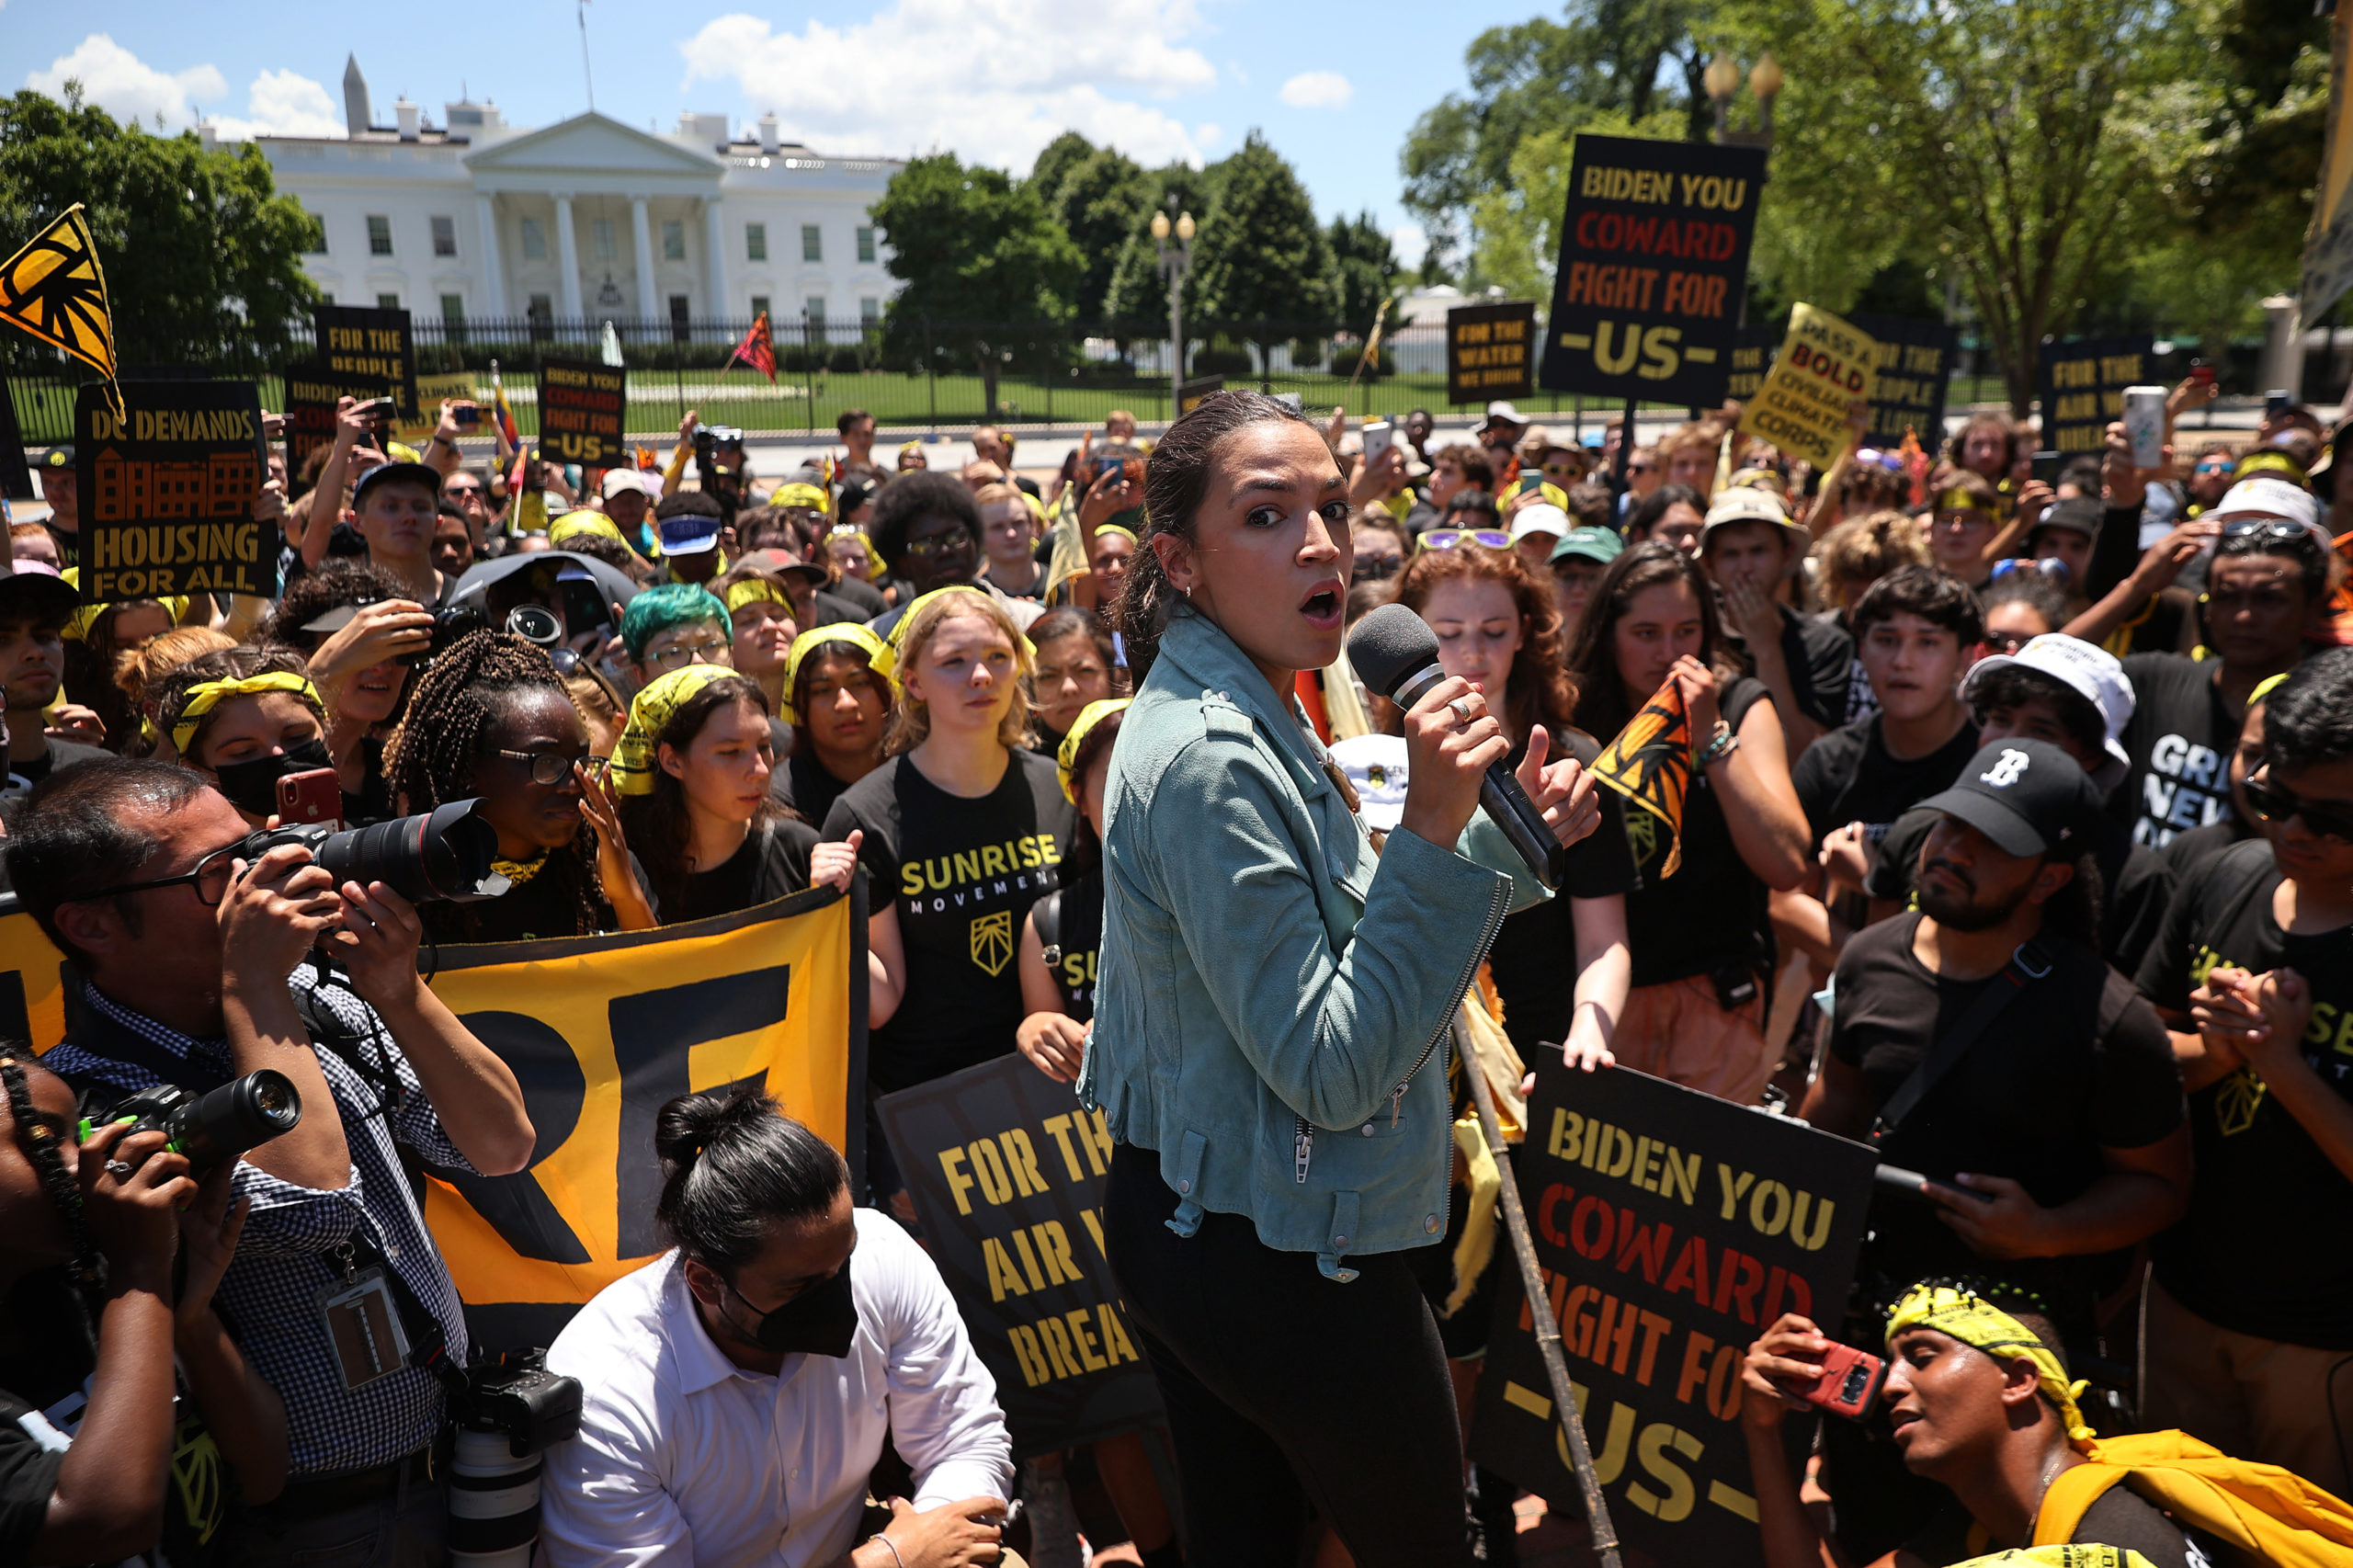 Democratic Rep. Alexandria Ocasio-Cortez rallies hundreds of young climate activists in Lafayette Square on the north side of the White House to demand that U.S. President Joe Biden work to make the Green New Deal into law on June 28, 2021 in Washington, DC. (Photo by Chip Somodevilla/Getty Images)